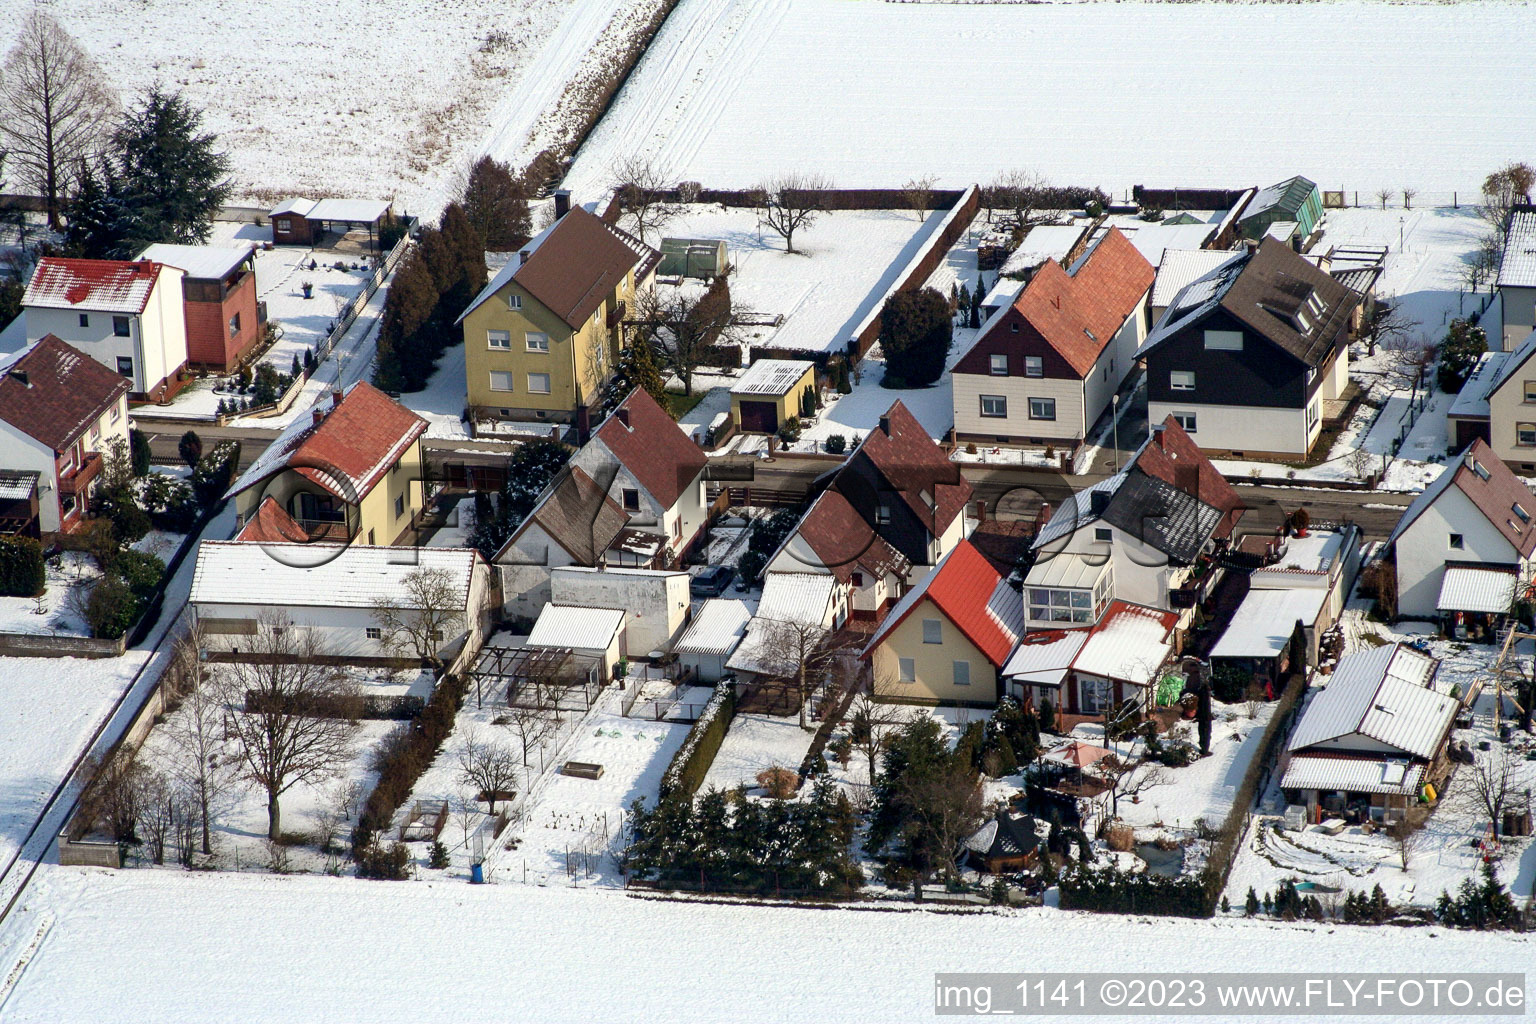 Aerial view of S in Freckenfeld in the state Rhineland-Palatinate, Germany